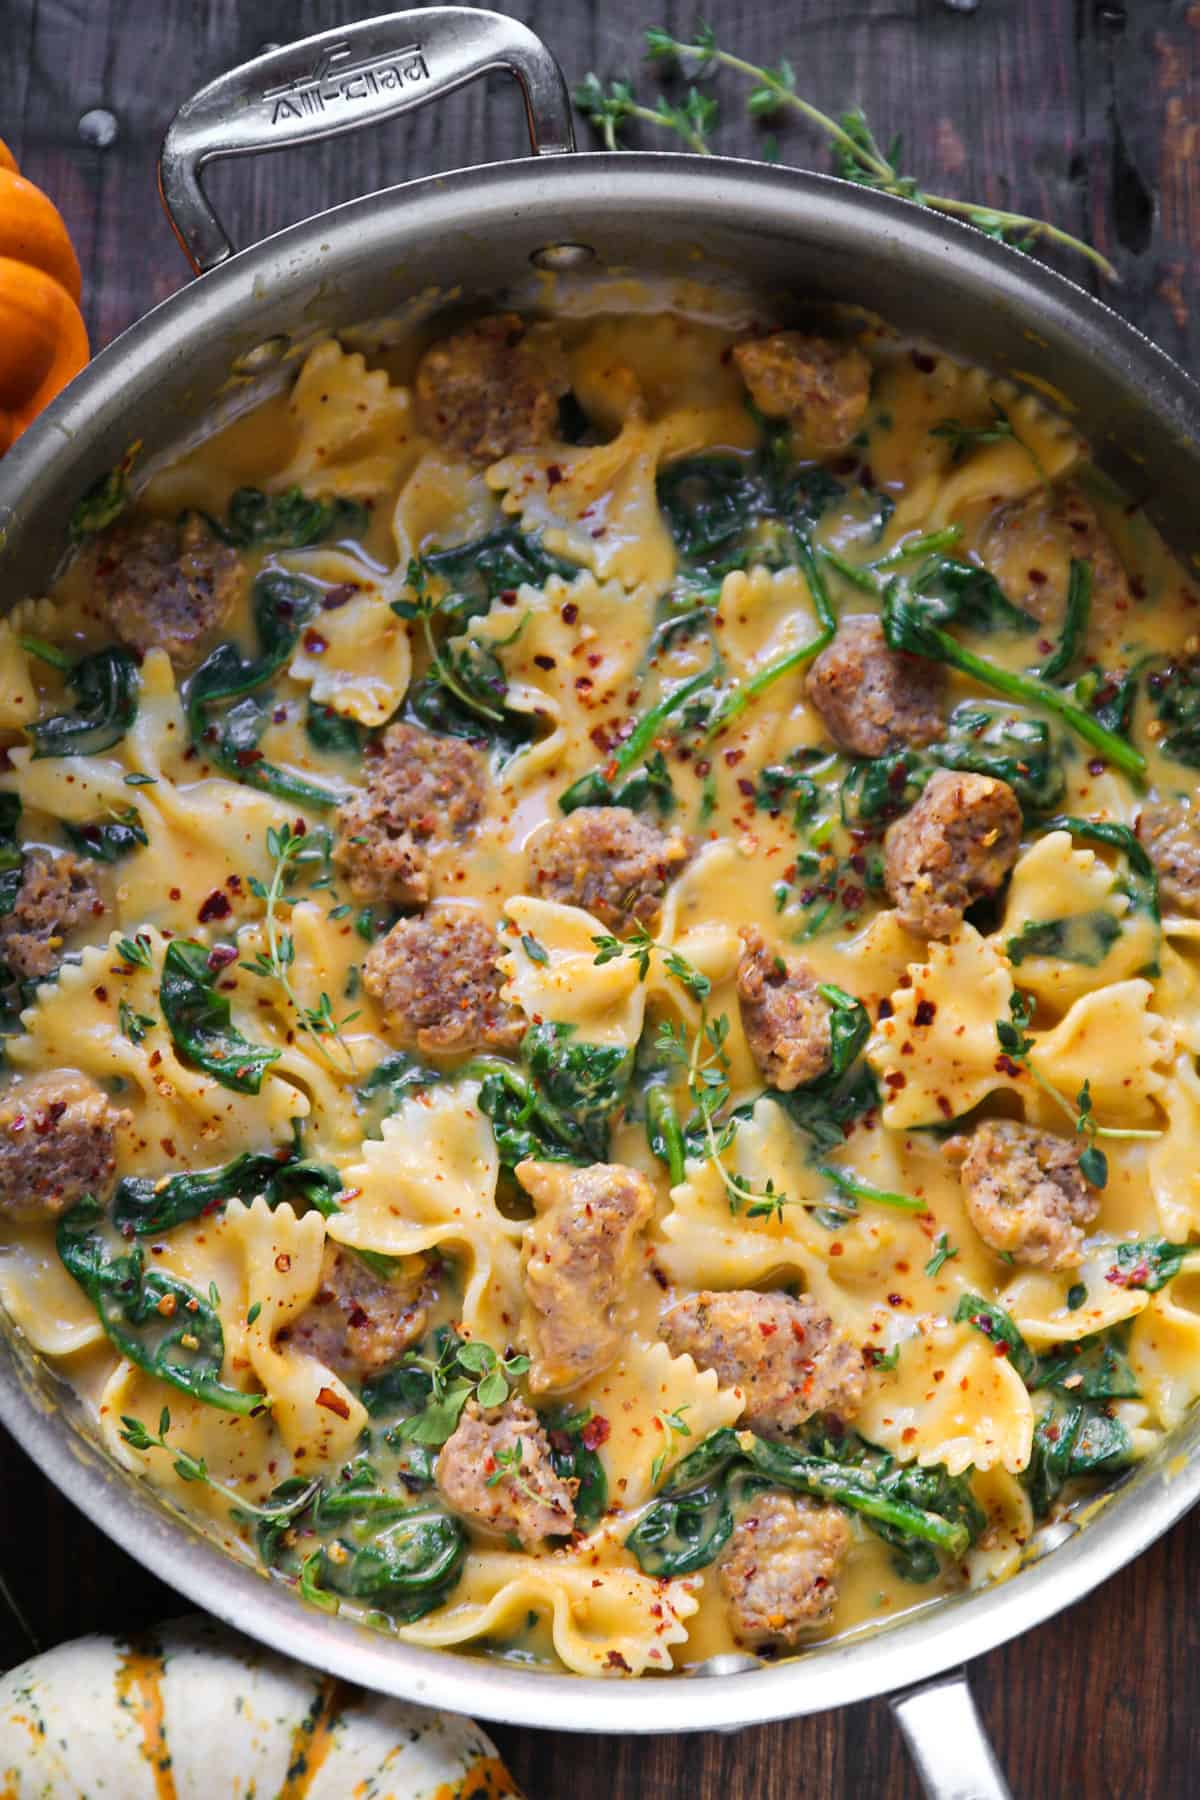 Creamy Butternut Squash Italian Sausage Bow-Tie Pasta with Spinach - in a stainless steel pan.